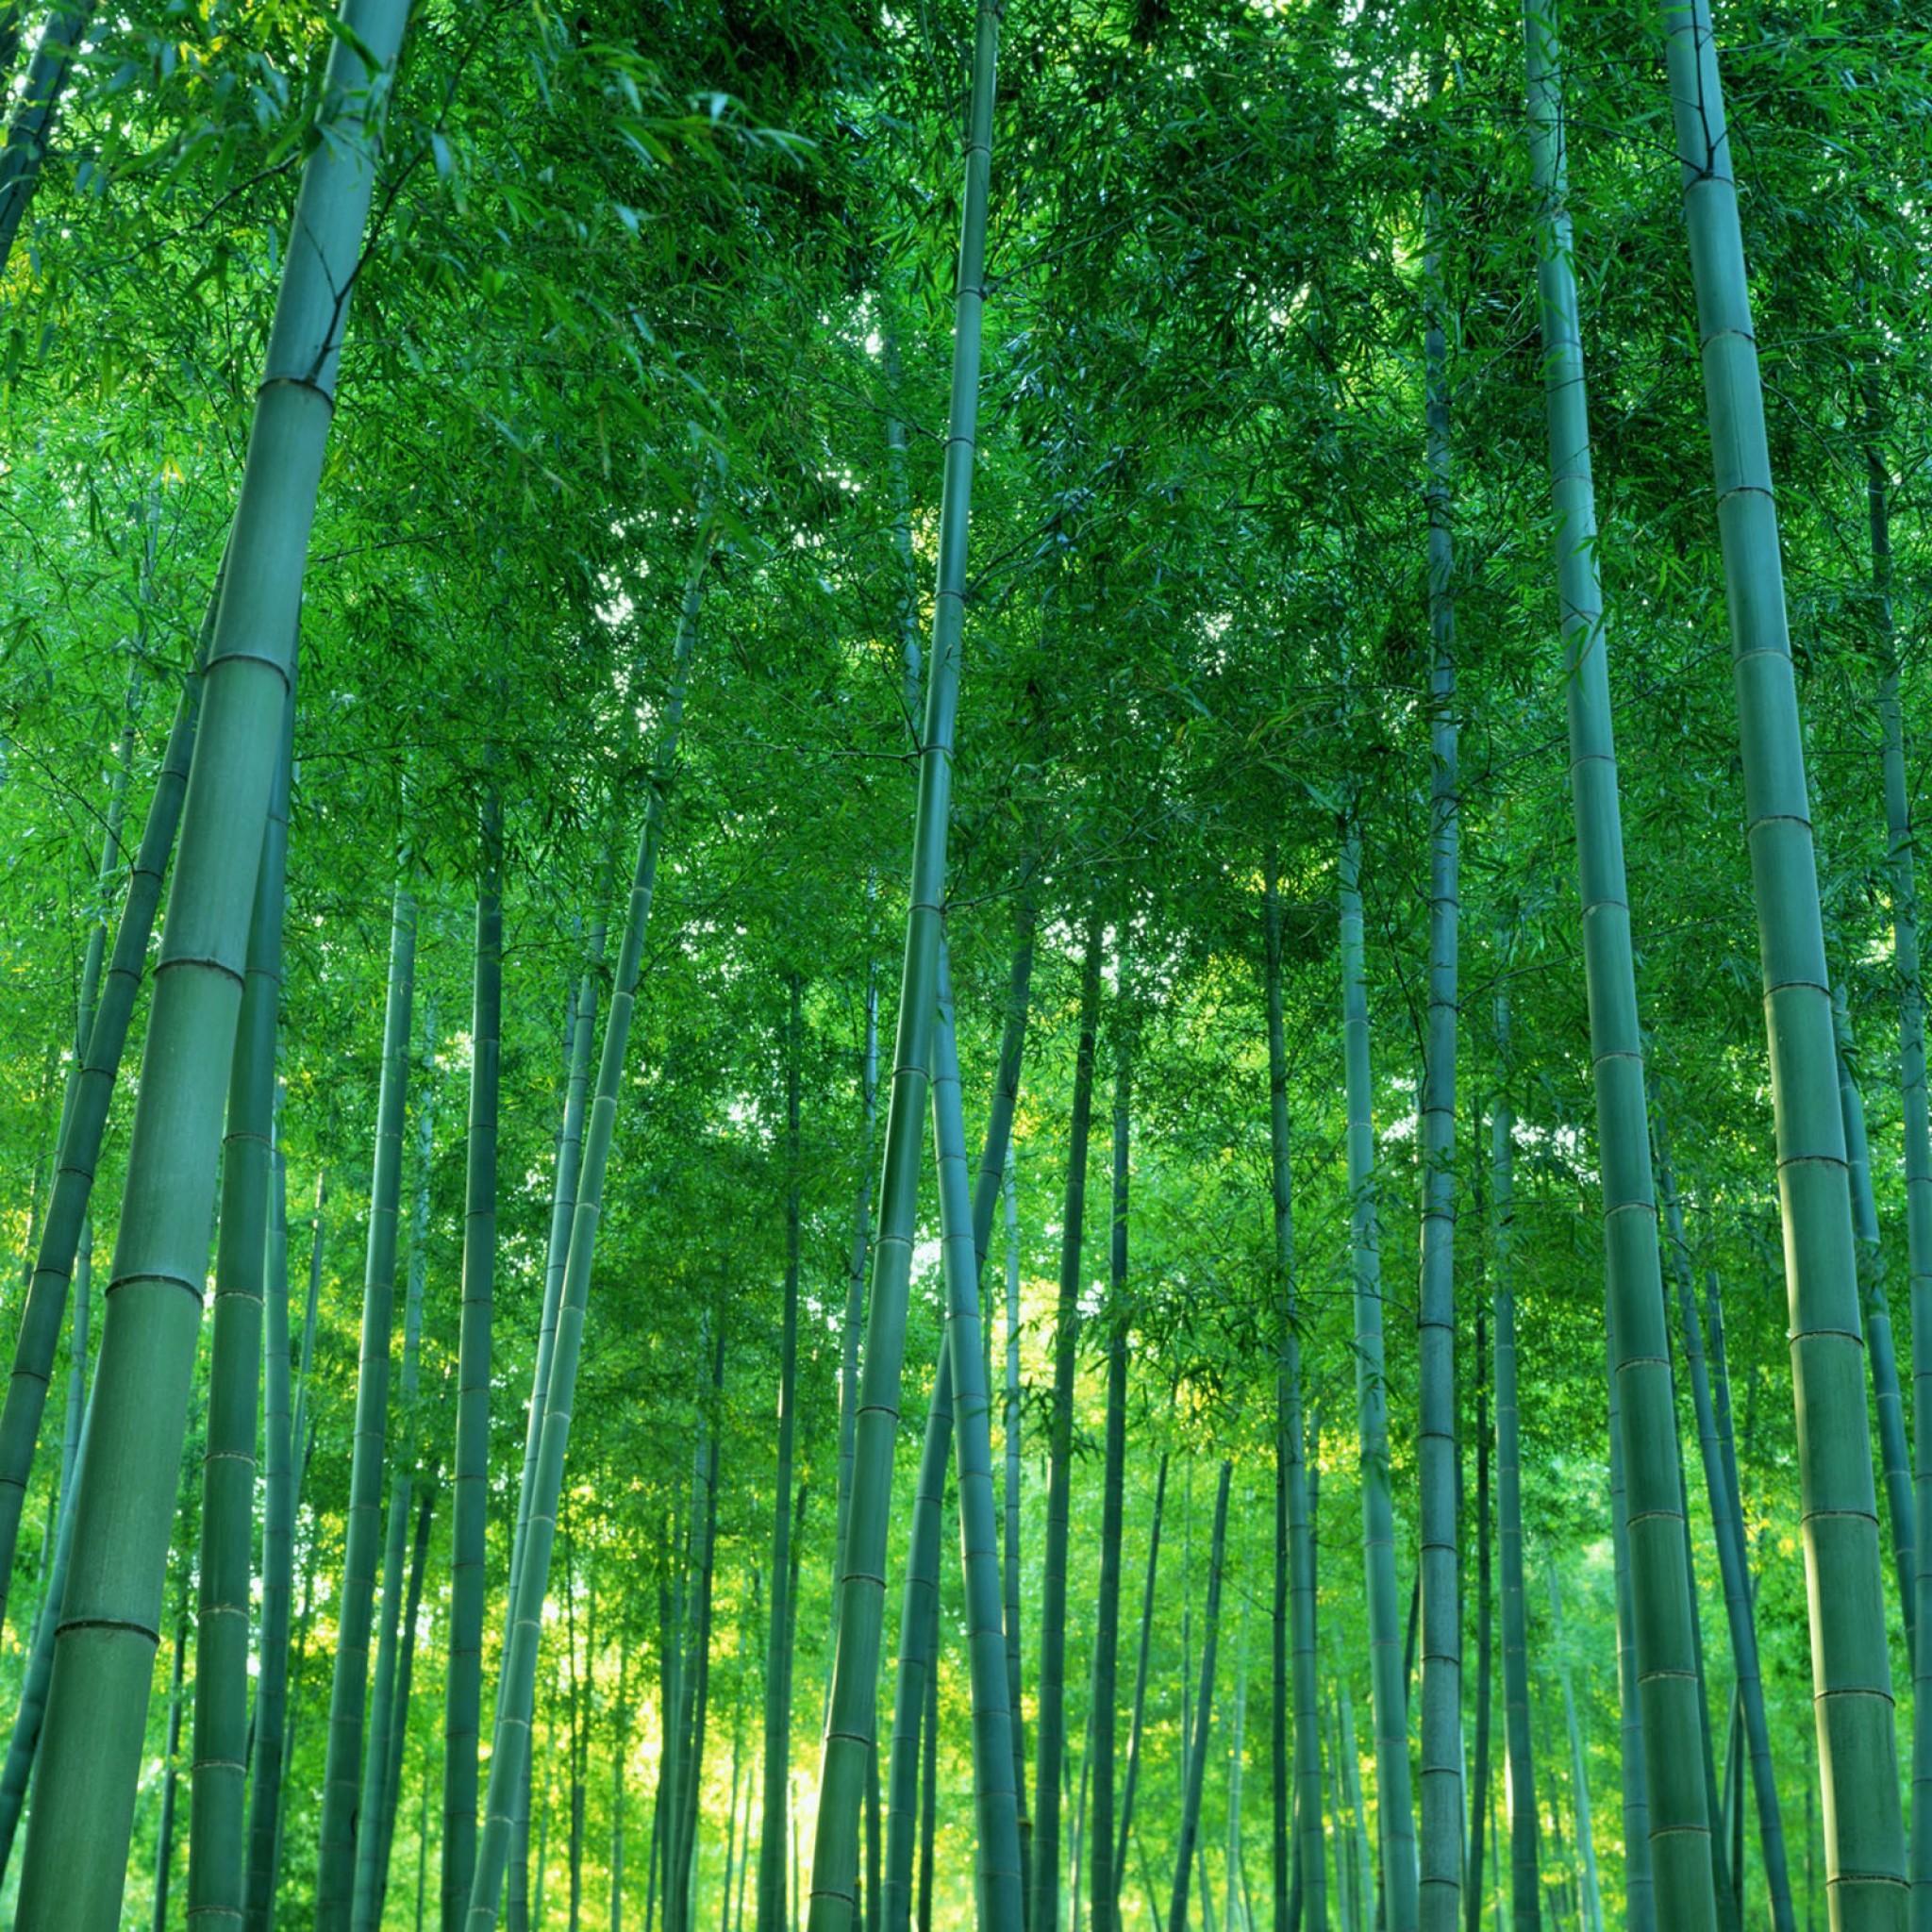 Green Bamboo Forest Image Photo Picture Wallpaper Download